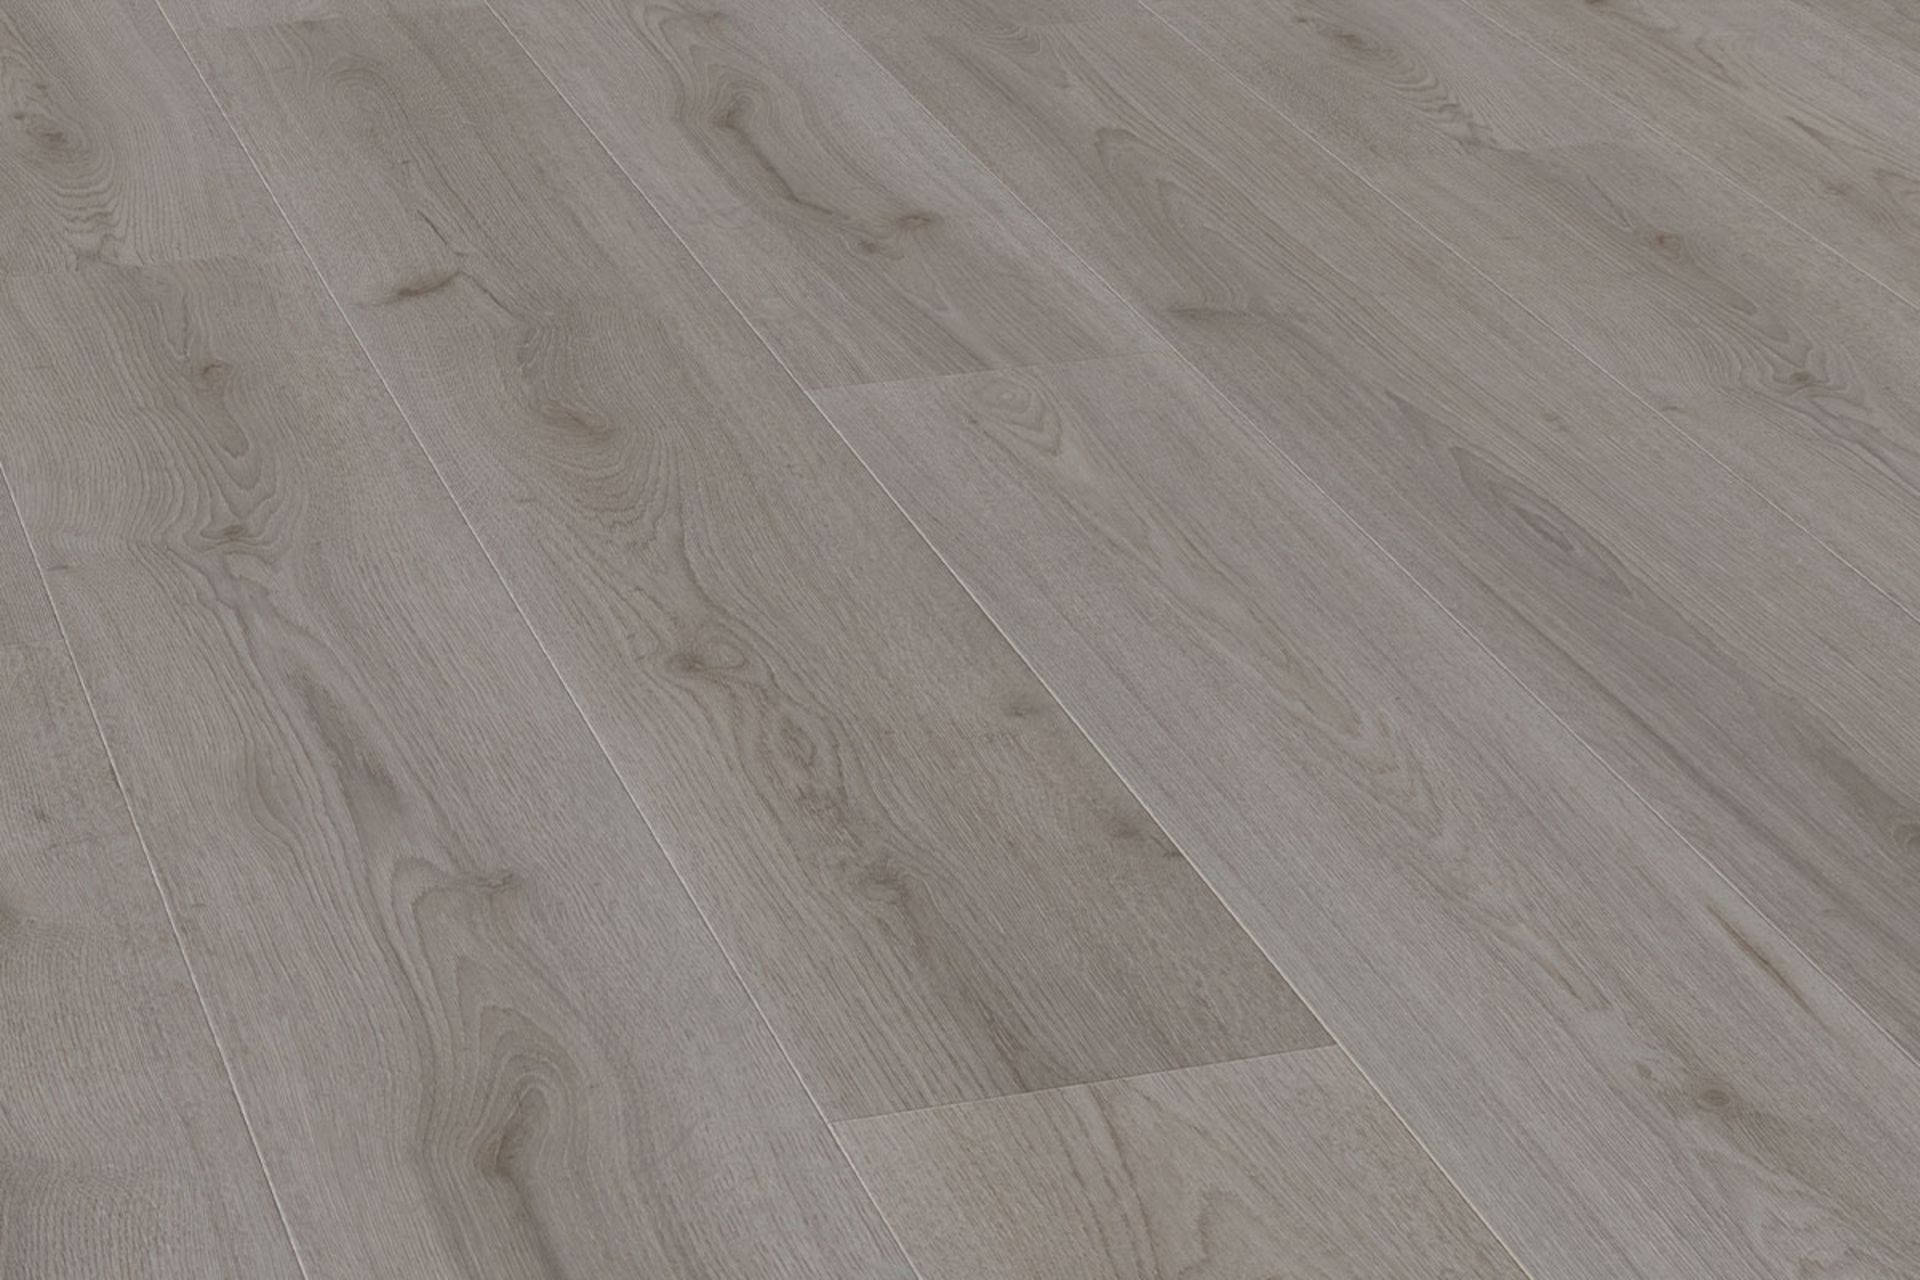 NEW 6.36m2 WILD DOVE OAK LAMINATE FLOORING . The elegant mid-grey hue of this floor complements... - Image 2 of 2